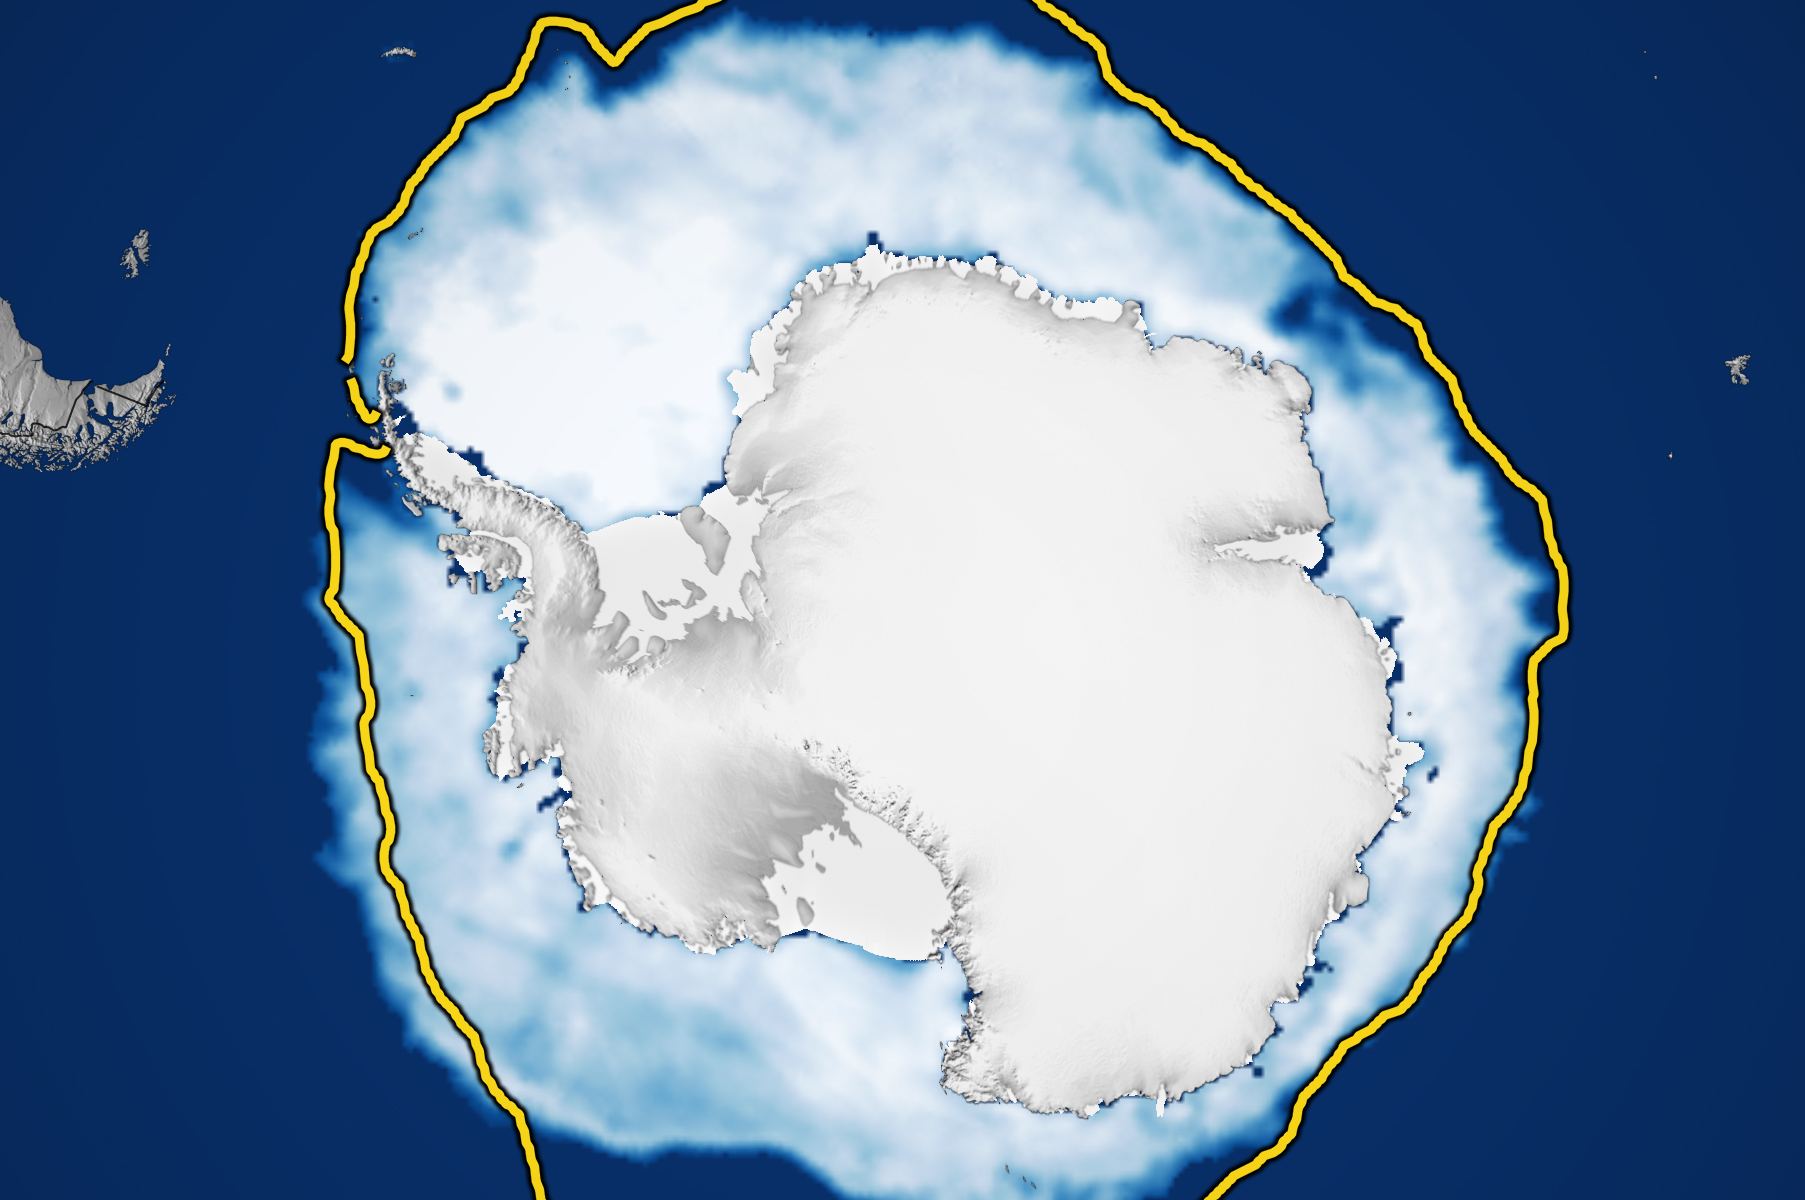 A map showing the expected amount of sea ice accumulation around Antarctica (yellow line) and the reality, which is much less. Courtesy NSIDC.